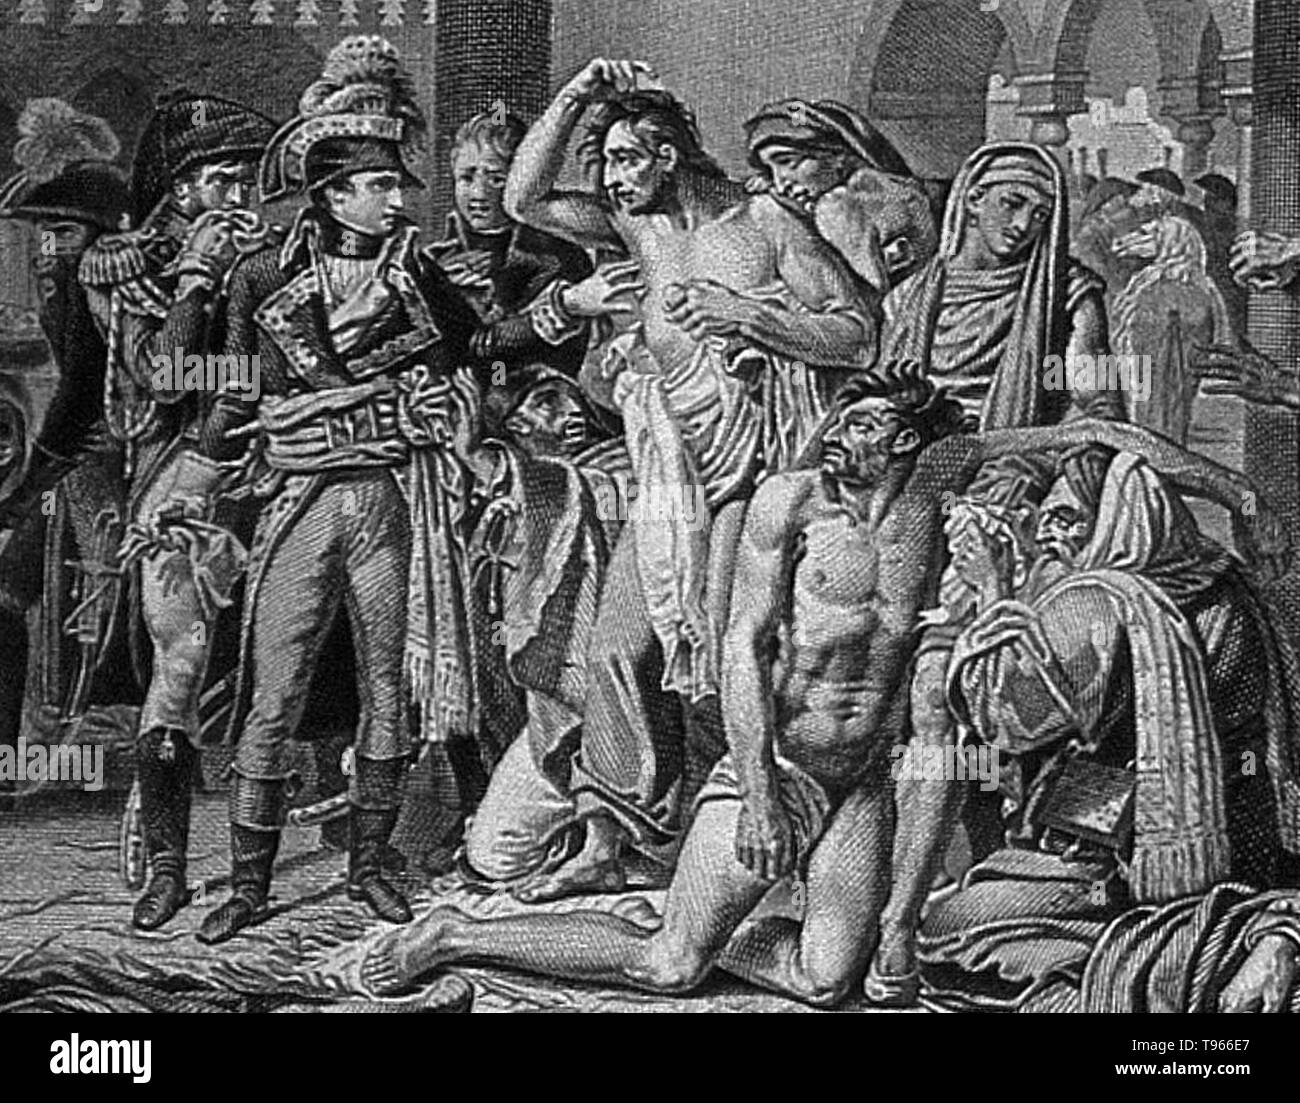 Visit by Napoleon Bonaparte to the plague victims of Jaffa, Egypt, in 1799. Patients surround Napoleon, in the courtyard of the hospital. Napoleon Bonaparte (August 15, 1769 - May 5, 1821) was a French military and political leader during the latter stages of the French Revolution. As Napoleon I, he was Emperor of the French from 1804 to 1815. Stock Photo